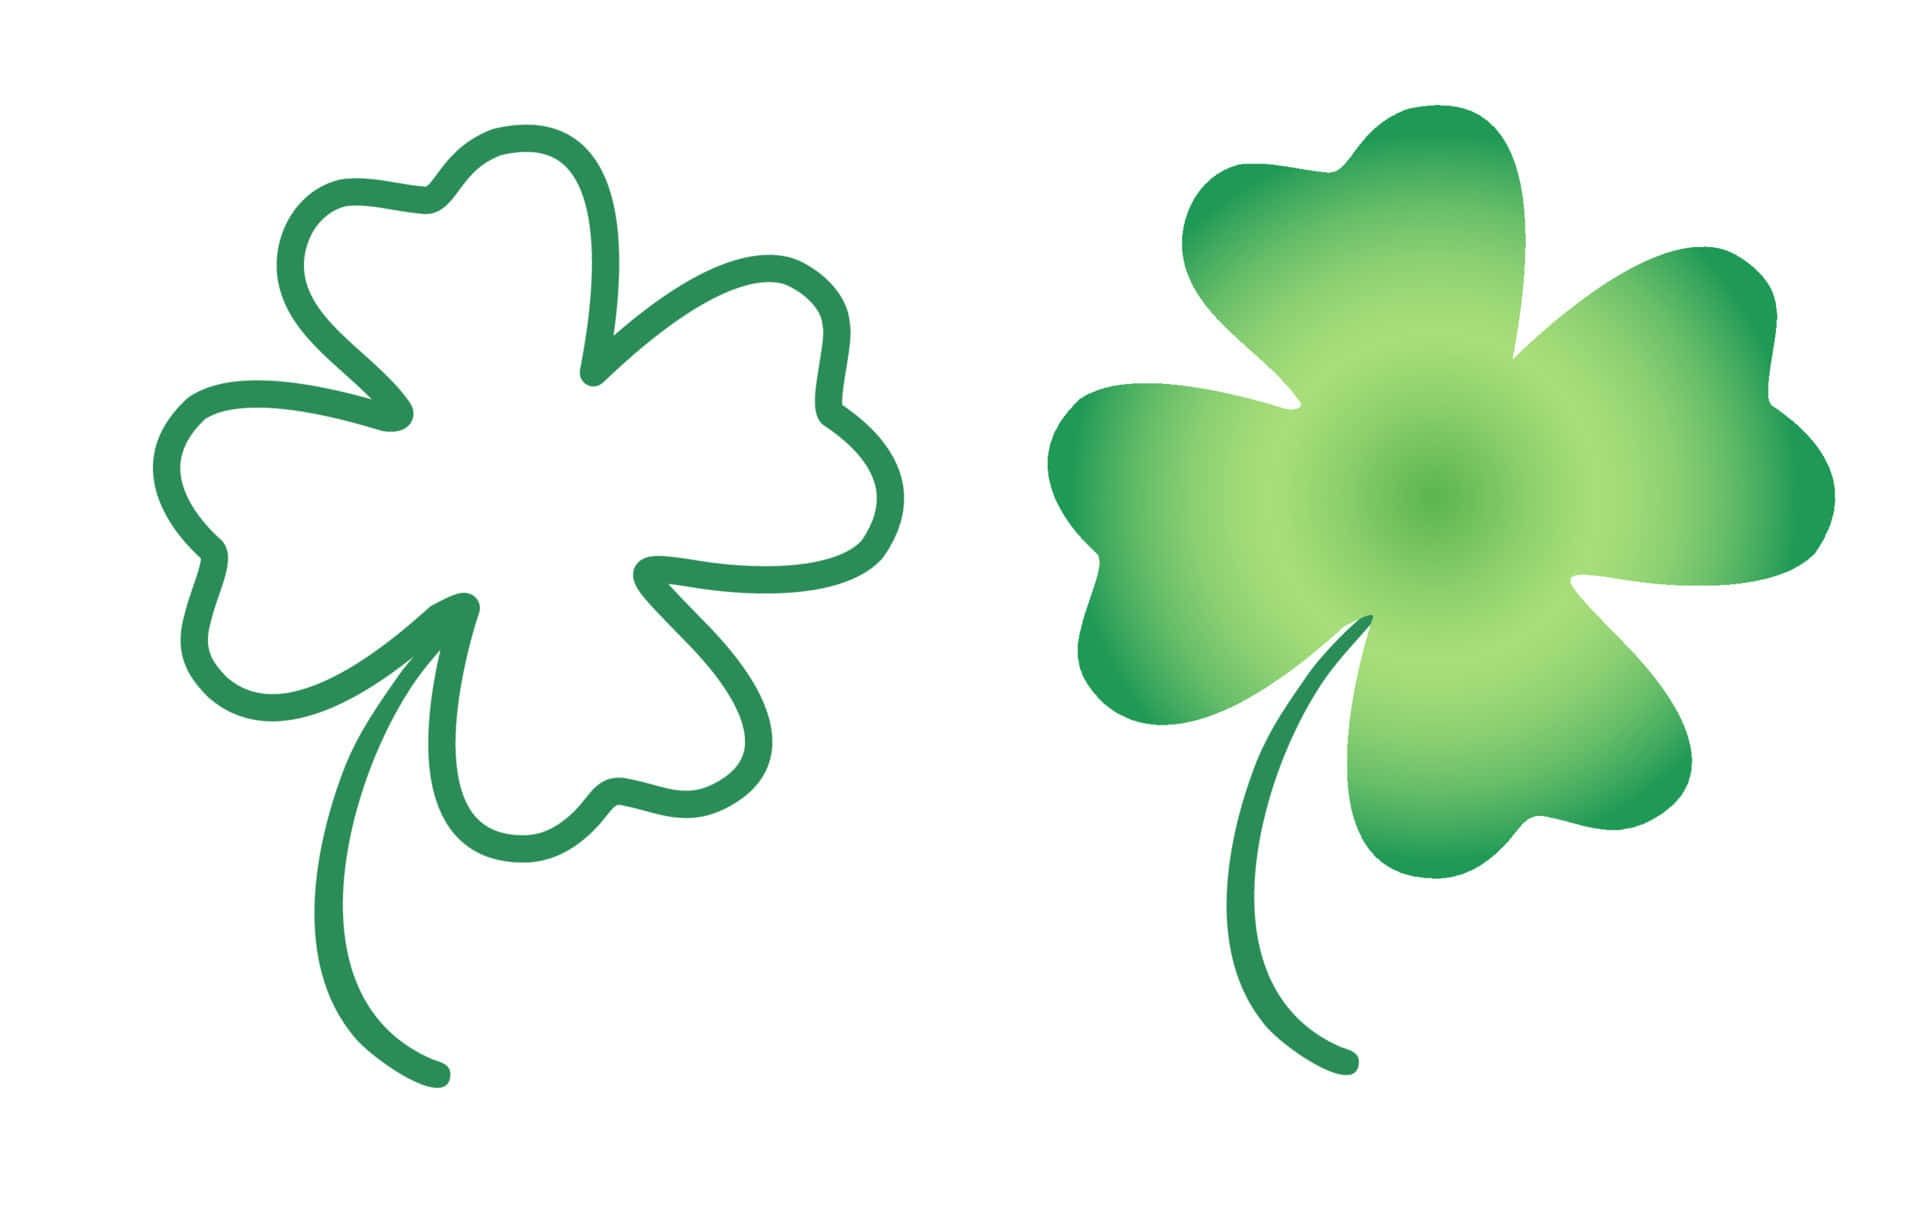 A Vibrant Four-Leaf Clover Symbolizing Luck and Prosperity